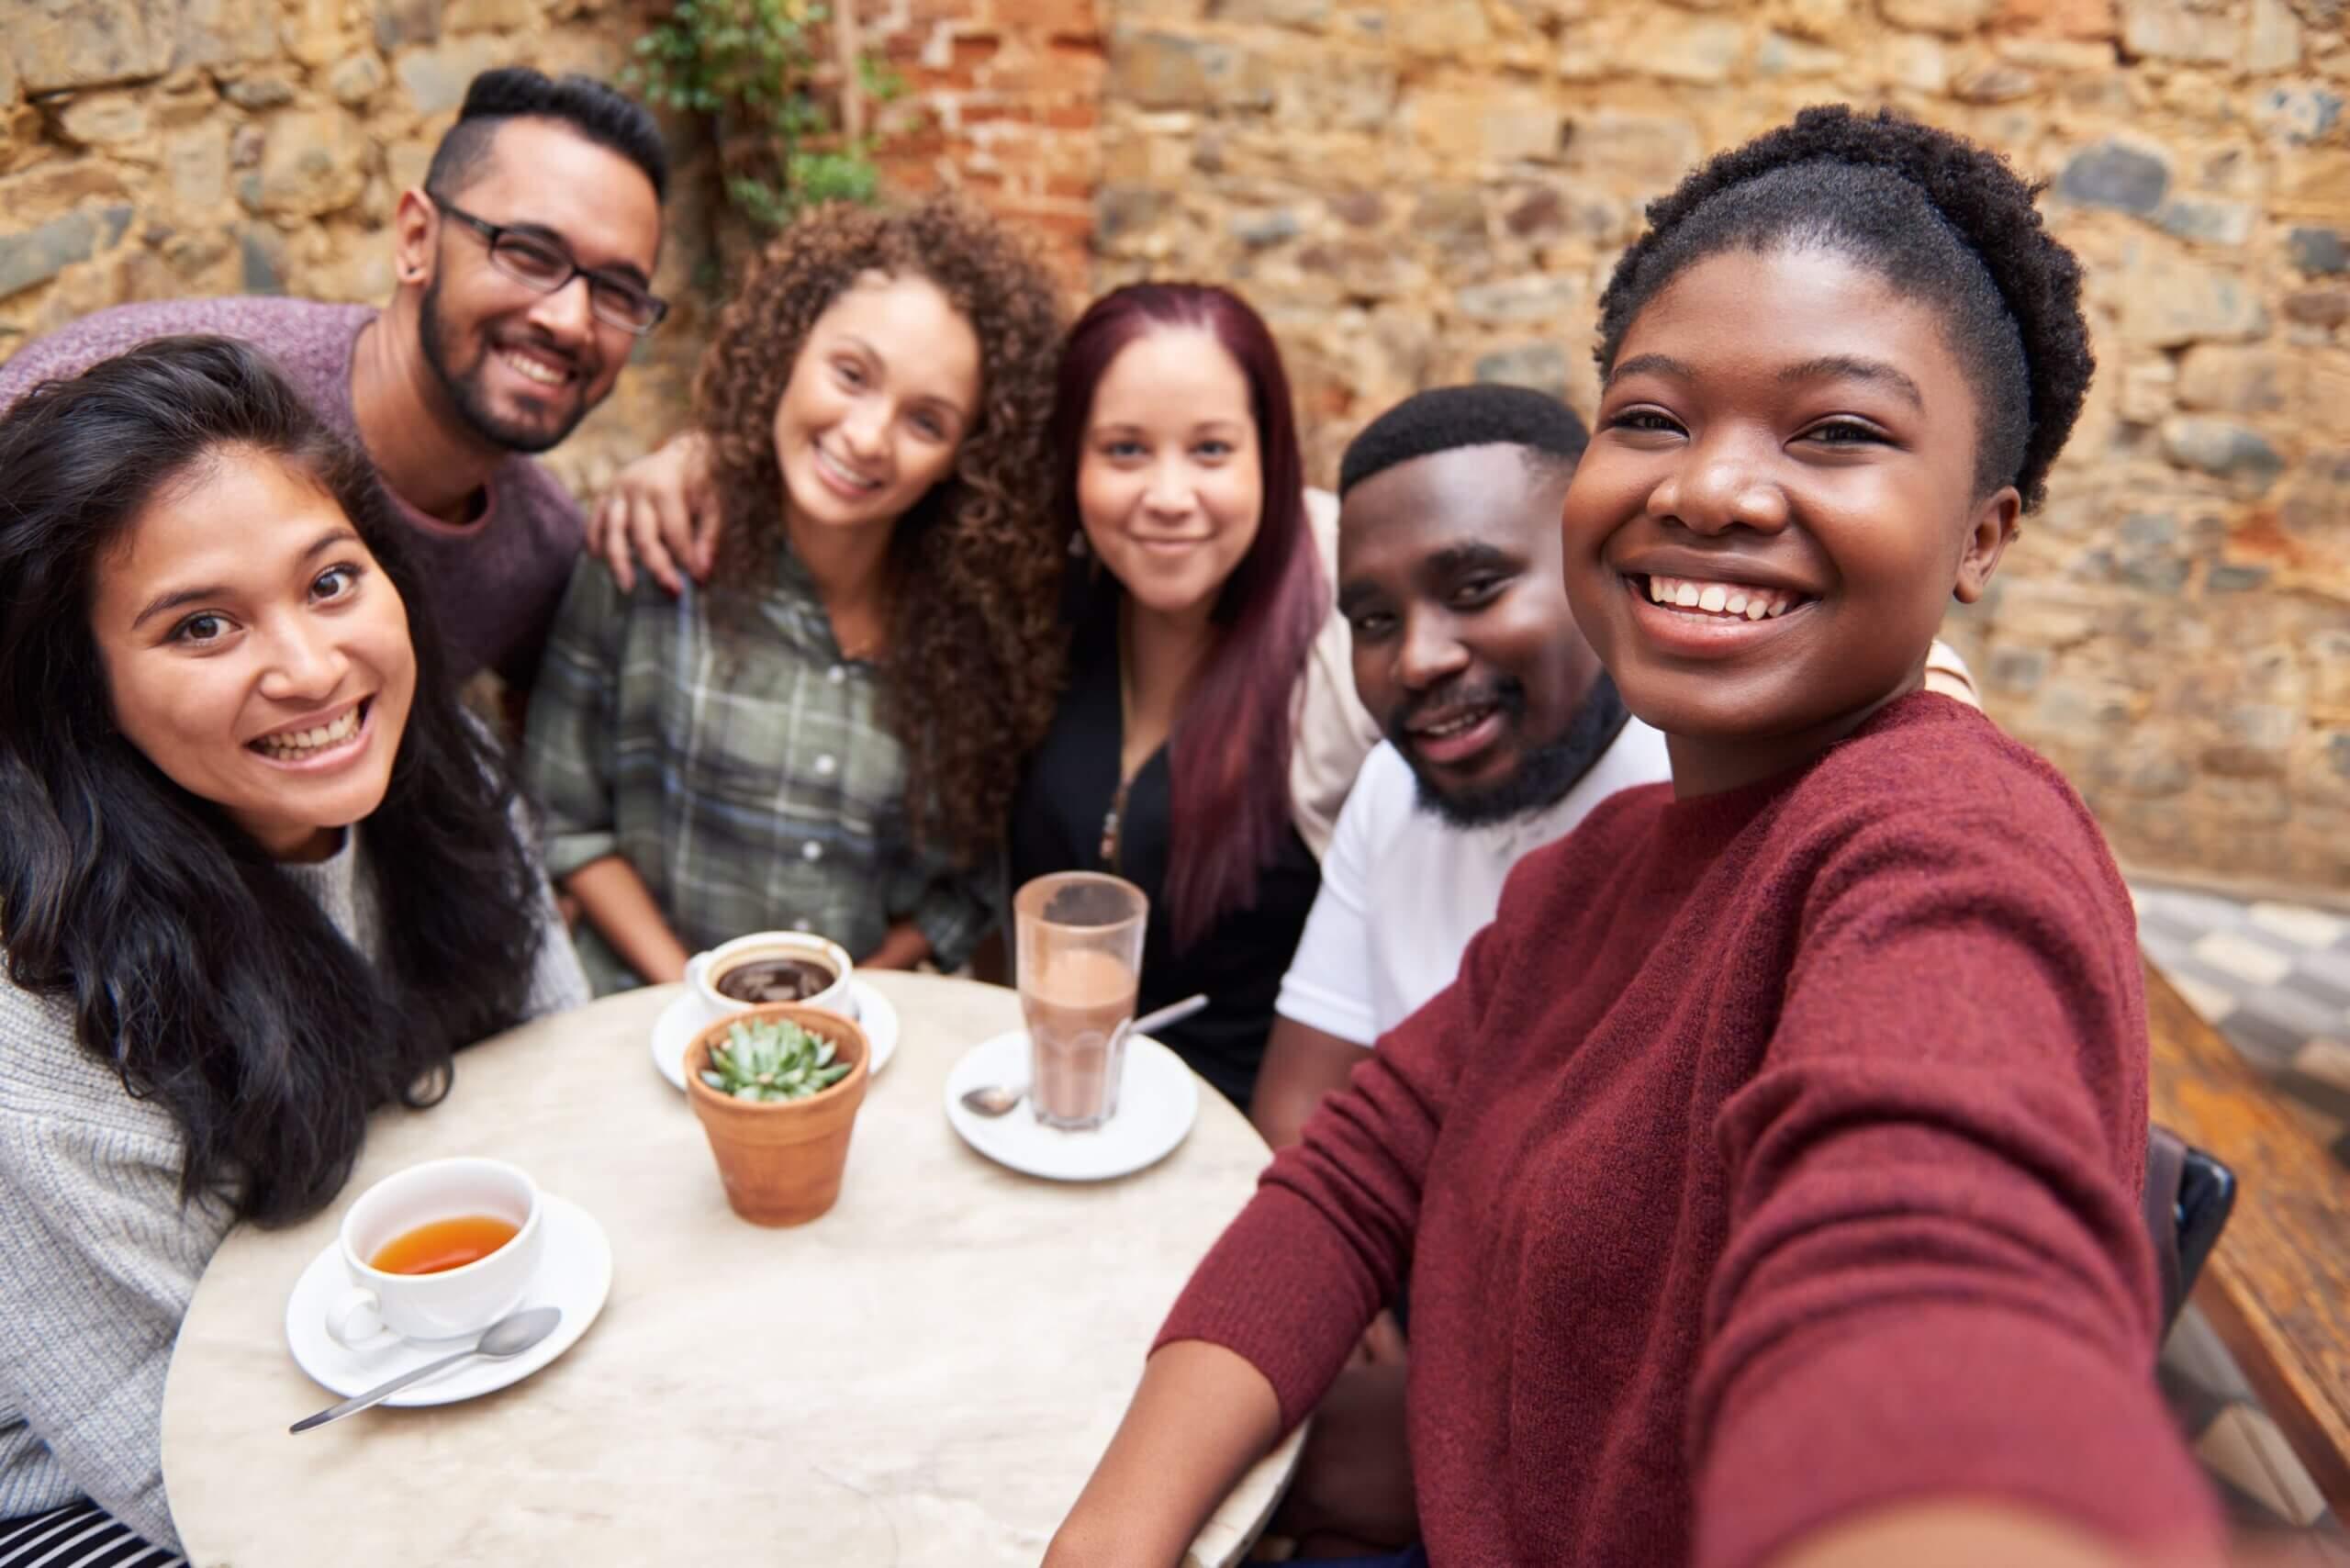 Multicultural group smiling while sitting at a table